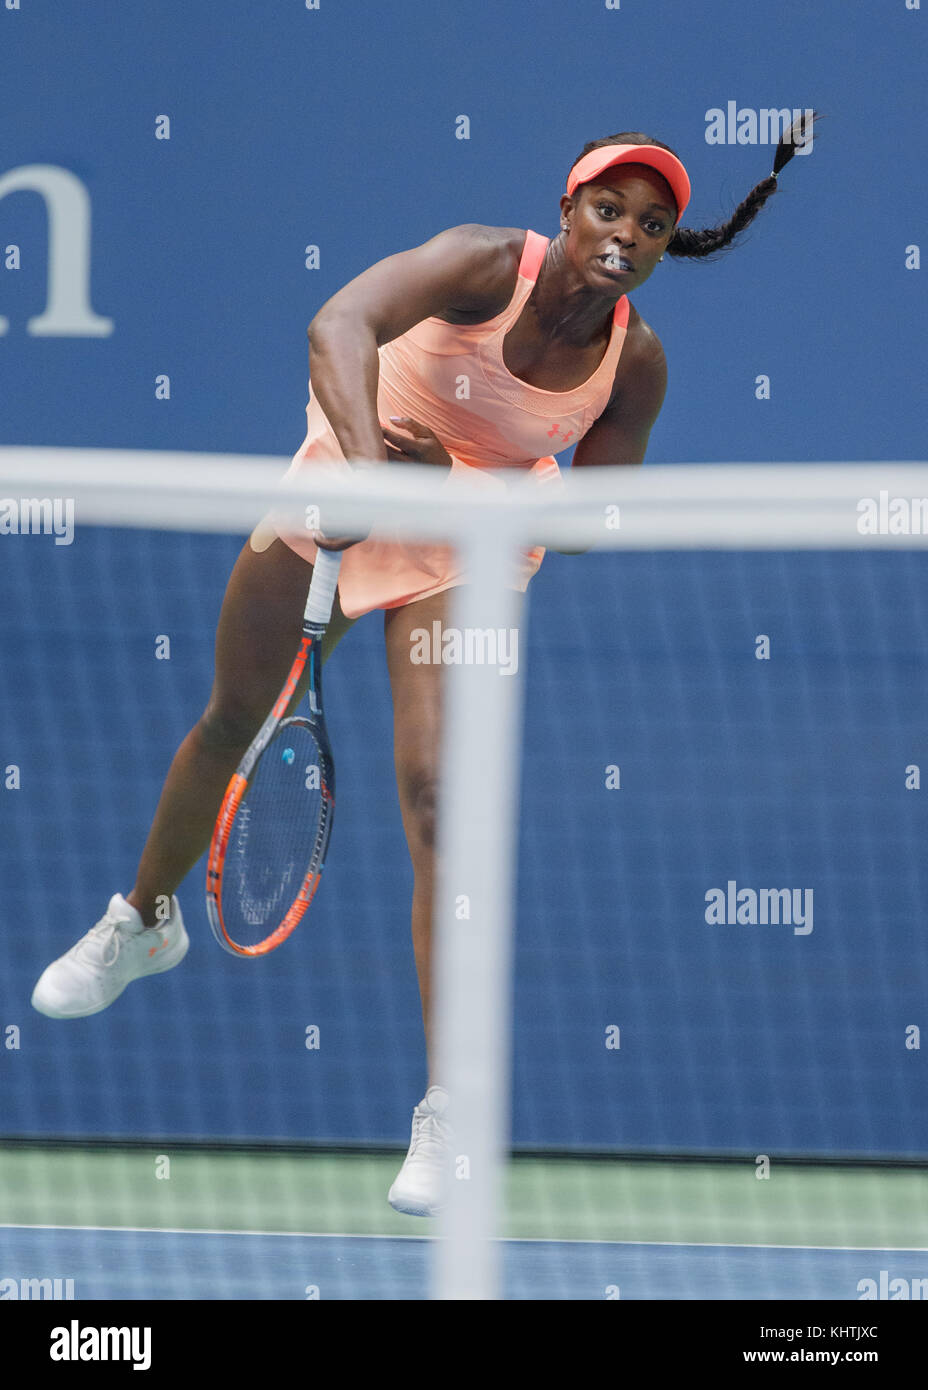 American tennis player SLOANE STEPHENS (USA) serving ball on court during women's singles match at US Open 2017 Tennis Championship, New York City, Ne Stock Photo